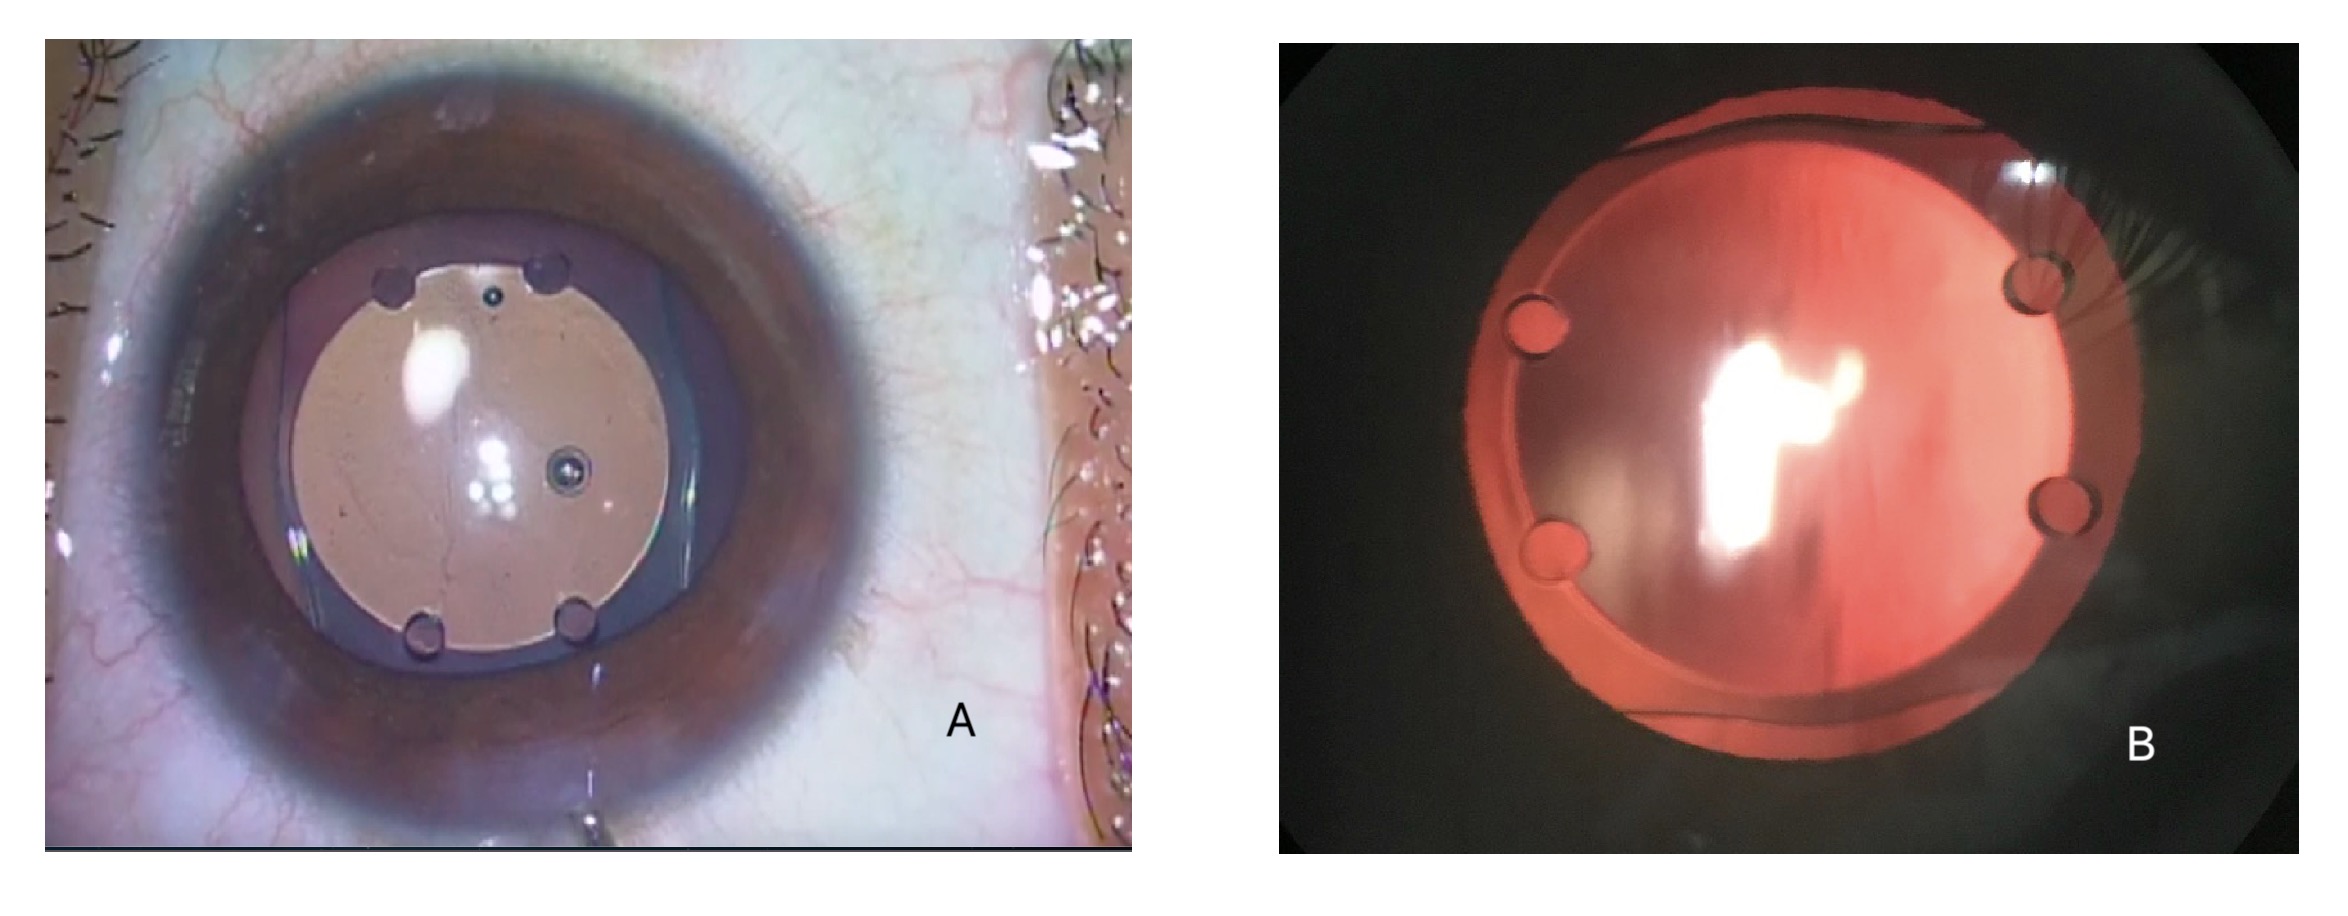 Phakic Intraocular Lens: A) Showing the intraoperative view 
                                            B) Showing the retr